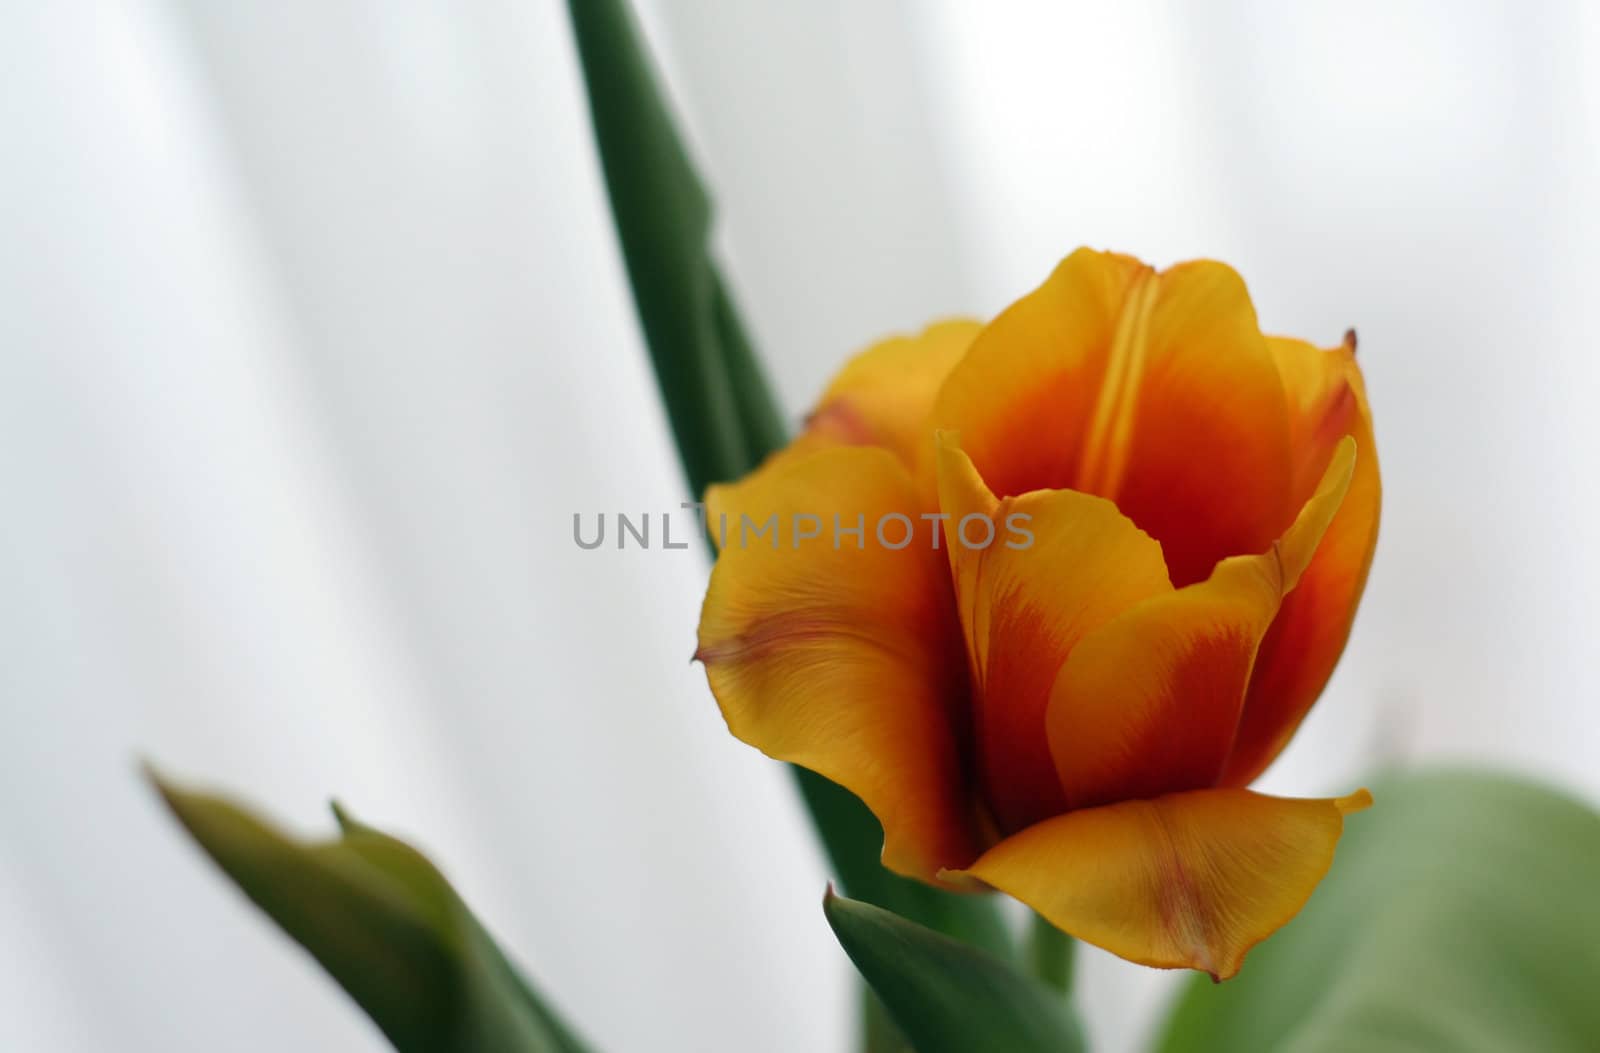 An Orangy Red Tulip shot against a white curtain background.